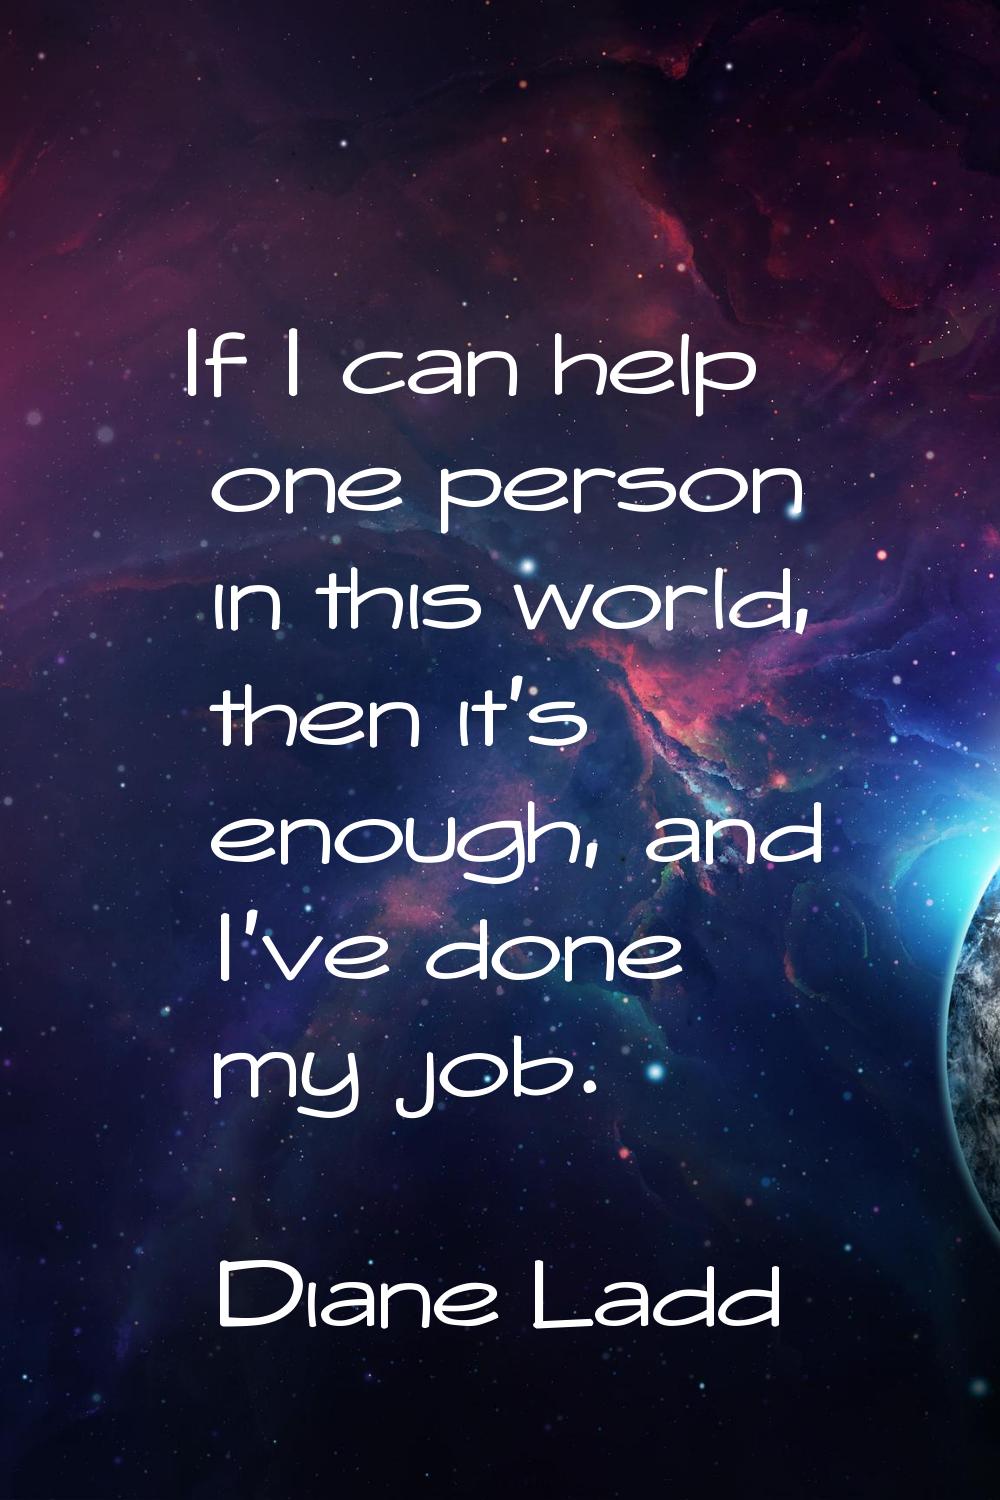 If I can help one person in this world, then it's enough, and I've done my job.